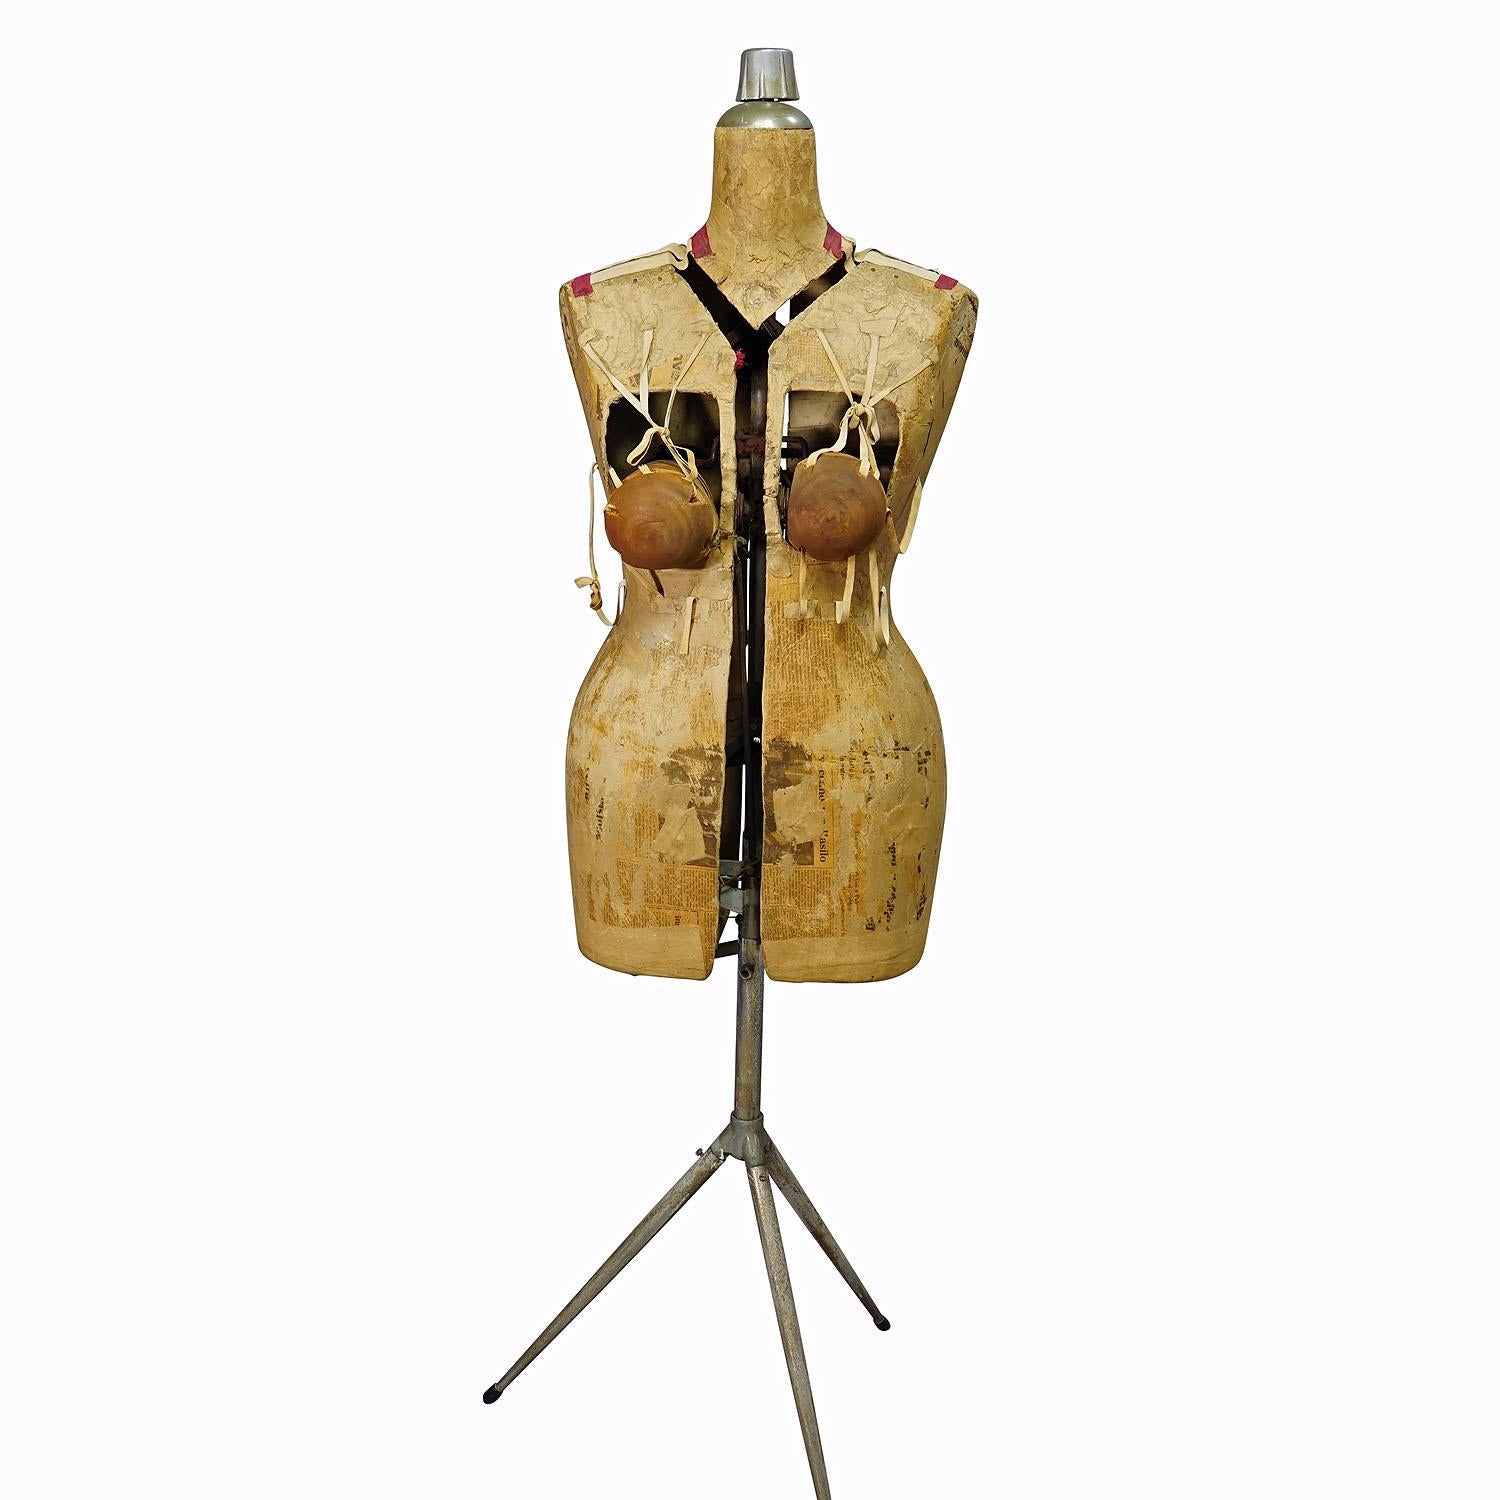 French Tailor's Mannequin, early 20th Century

French 20th century tailor's mannequin. Made of paper, fabric and metal. It features a mechanism inside which allows the tailor to adjust the mannequin to different sizes. Good unrestored condition,